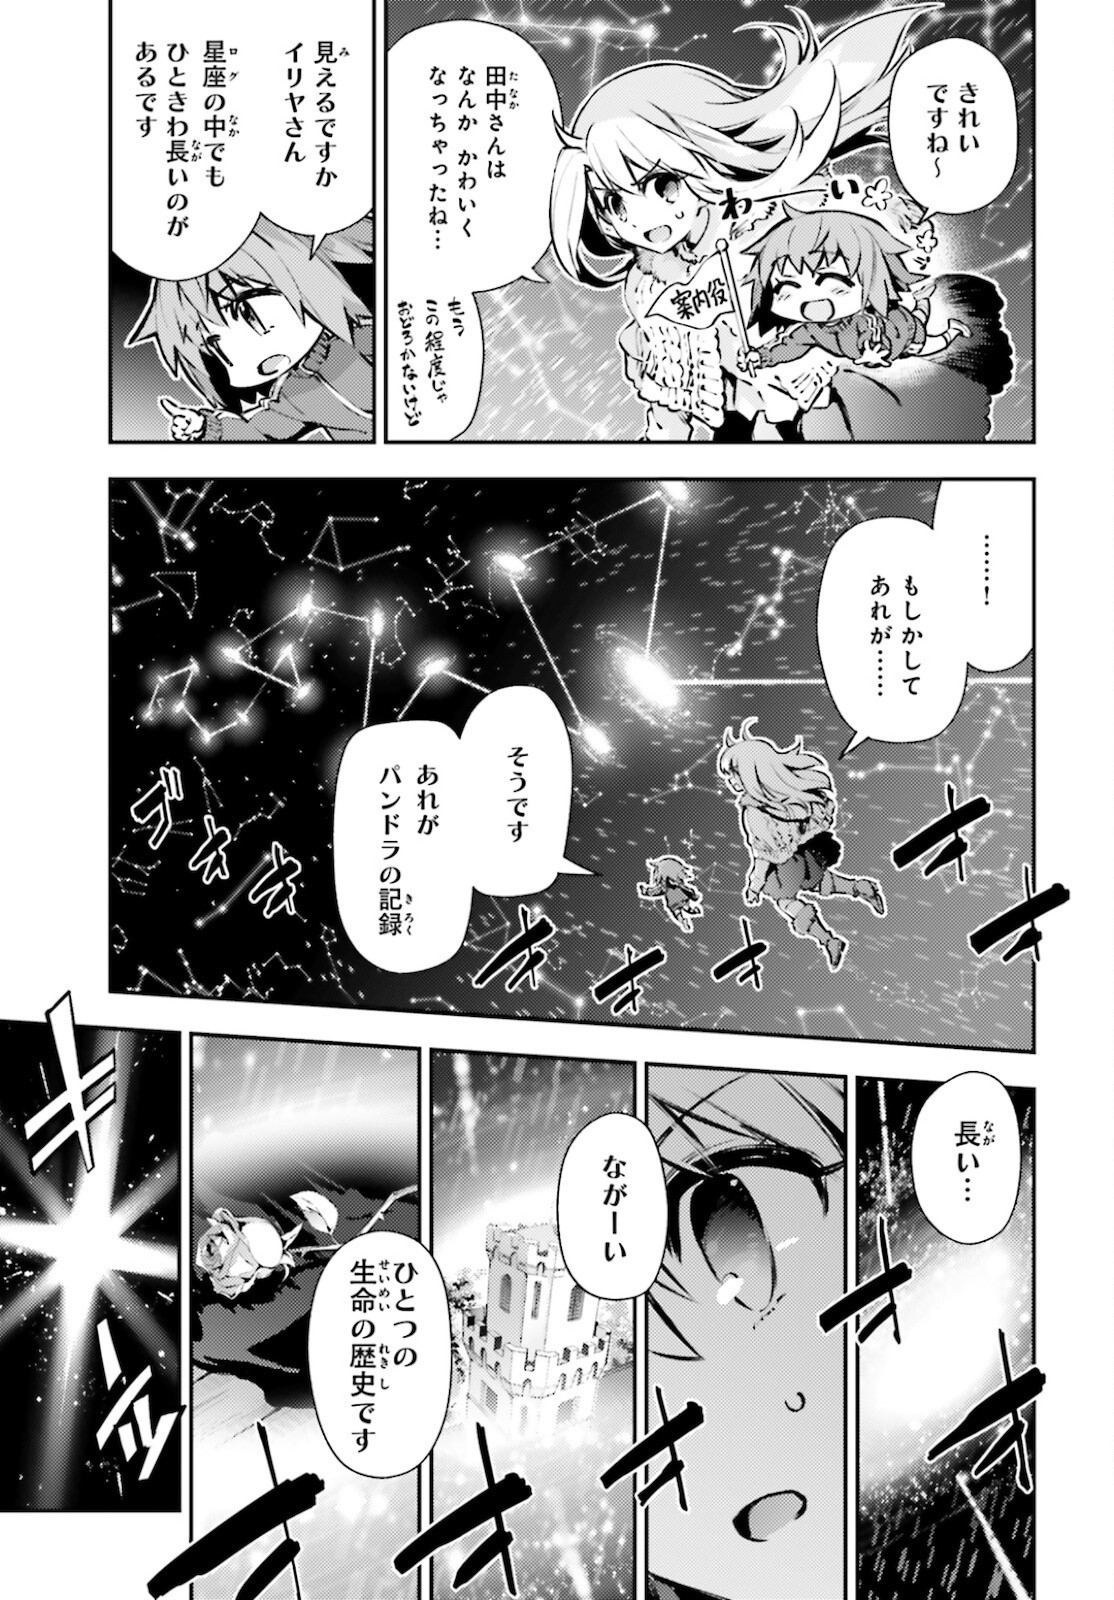 Fate/Kaleid Liner Prisma Illya Drei! - Chapter 63 - Page 3